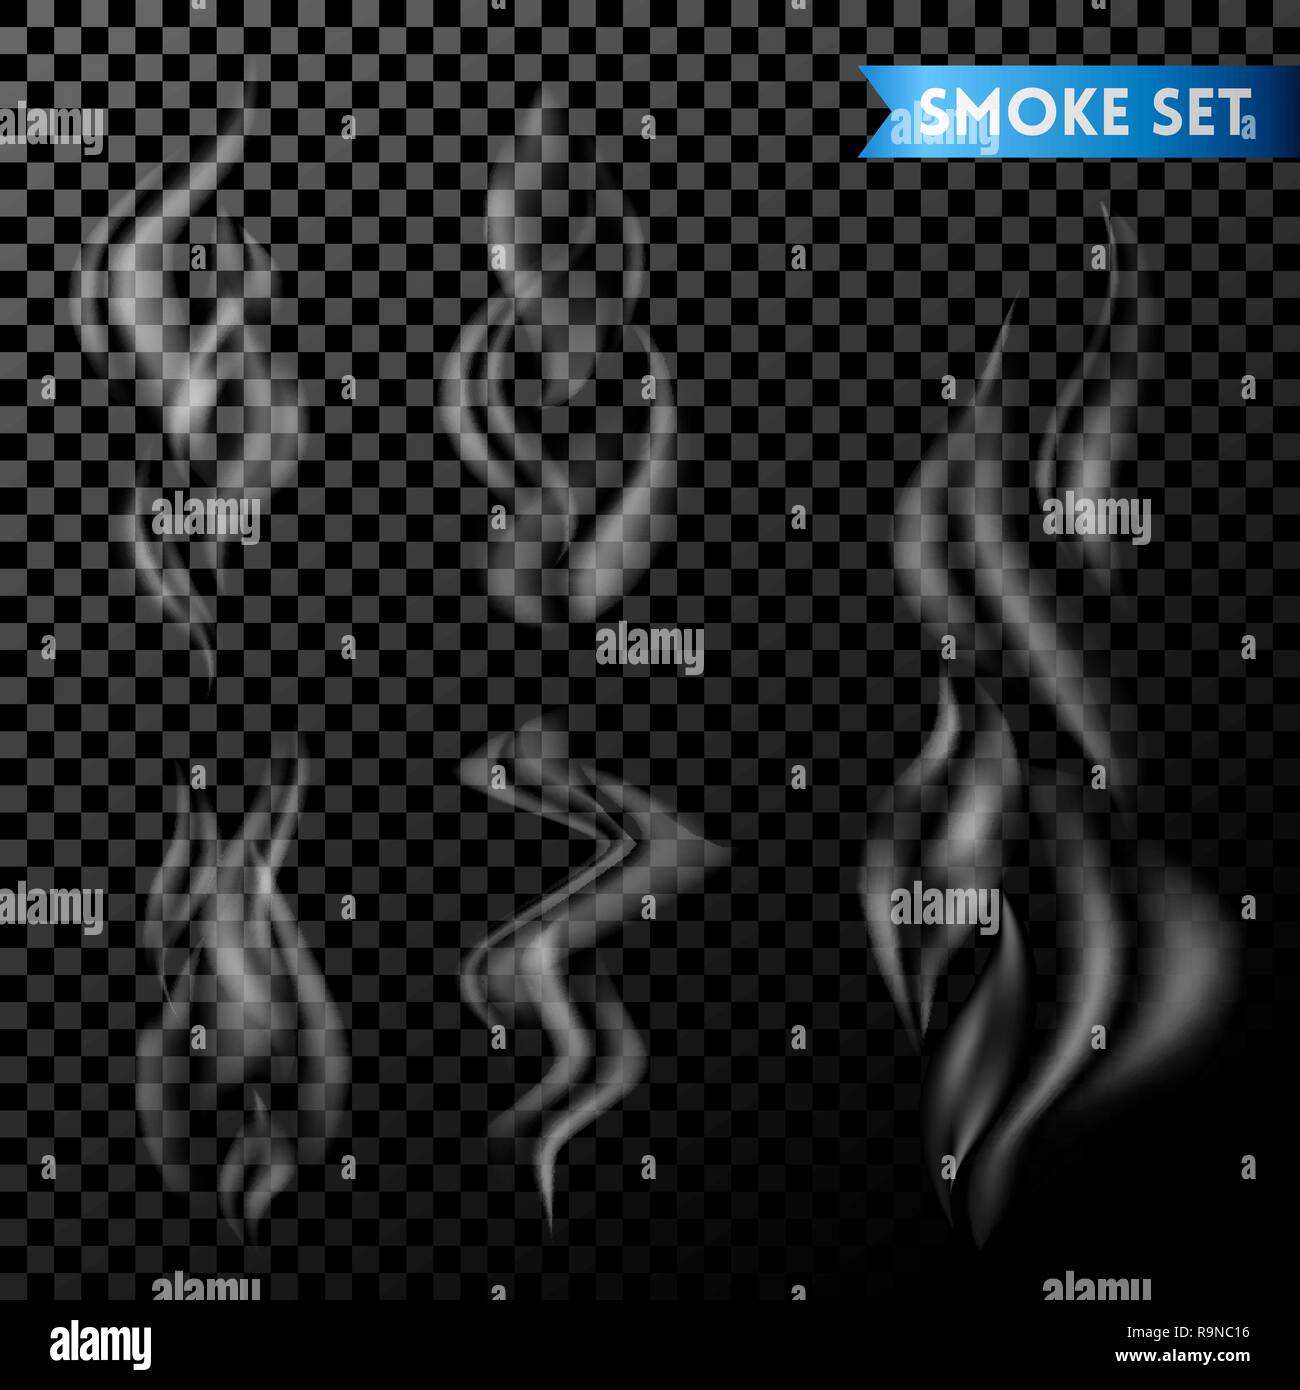 Set of smoke or steam set on transparent background Stock Vector